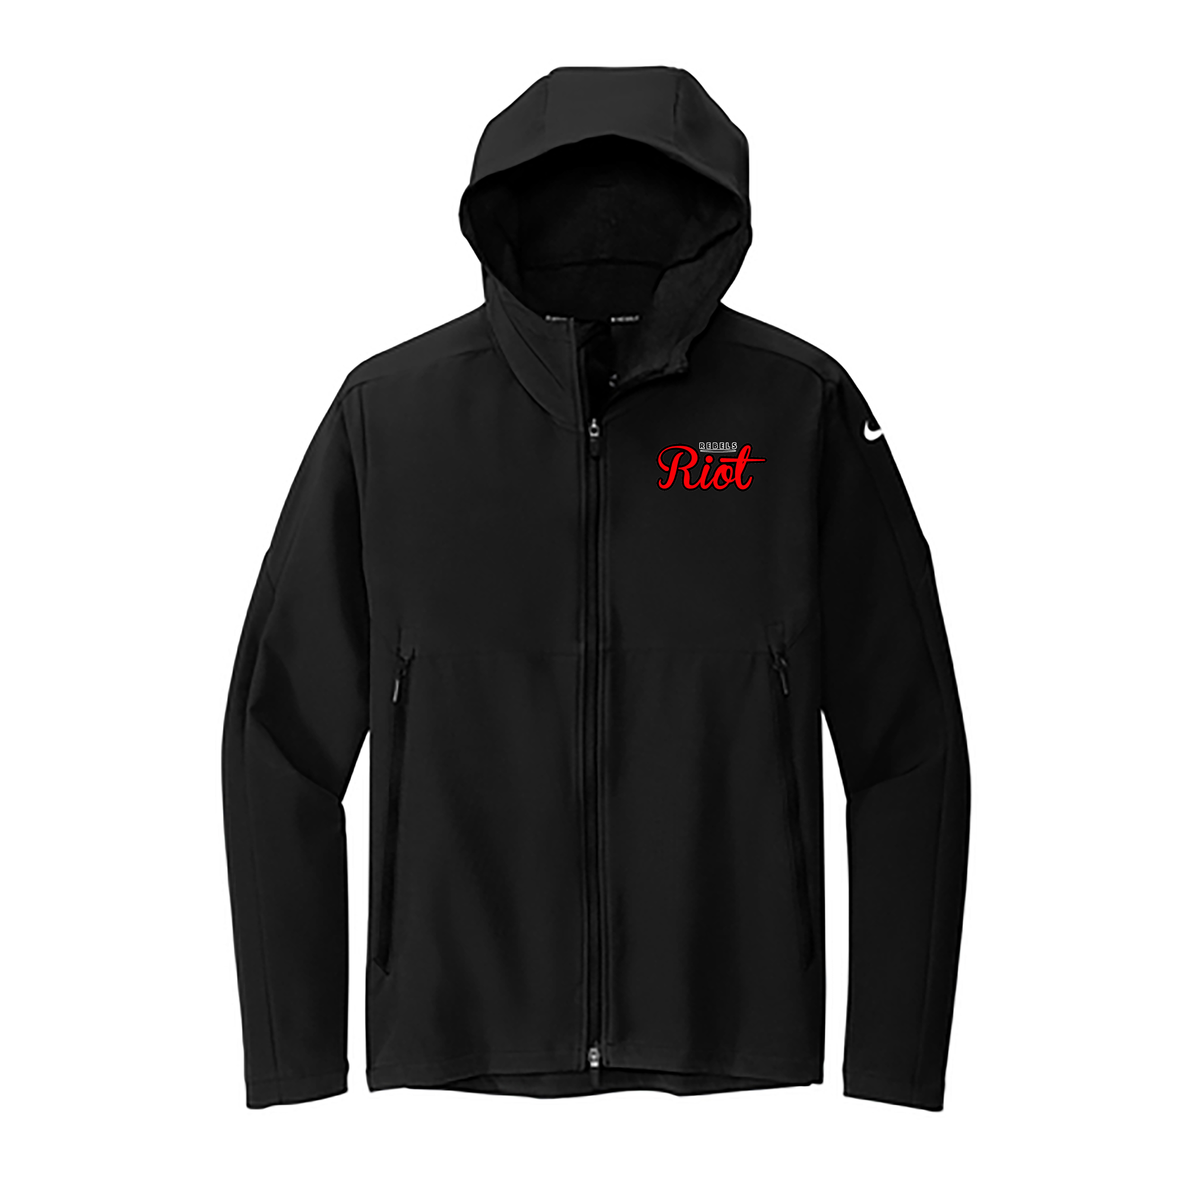 Rebels 2031 Riot Nike Hooded Soft Shell Jacket